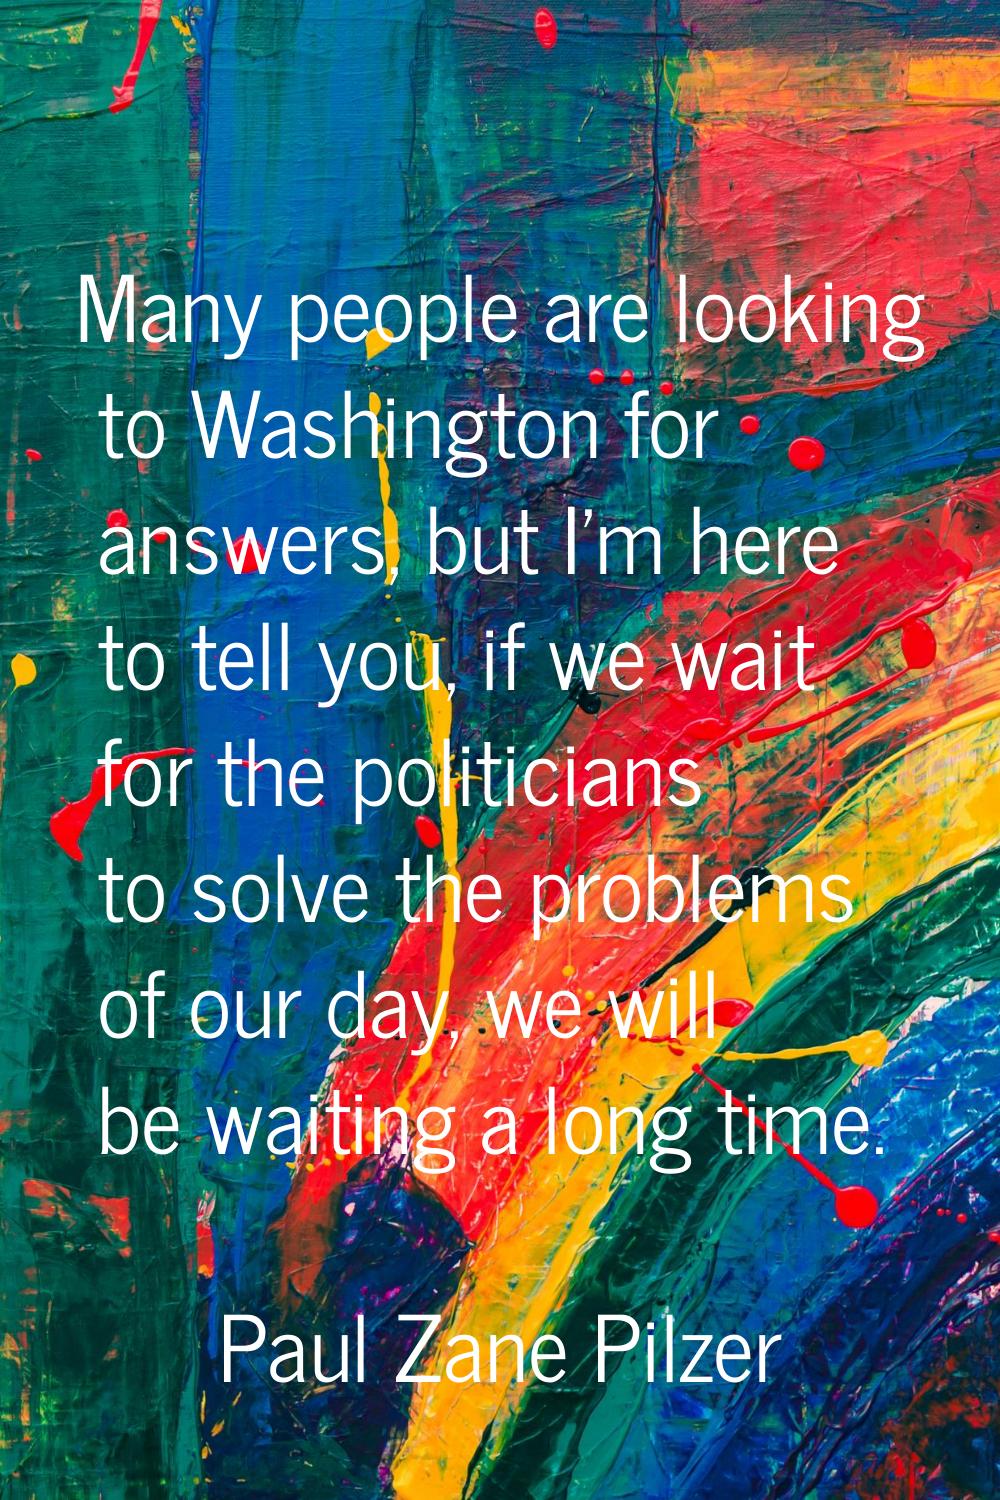 Many people are looking to Washington for answers, but I'm here to tell you, if we wait for the pol